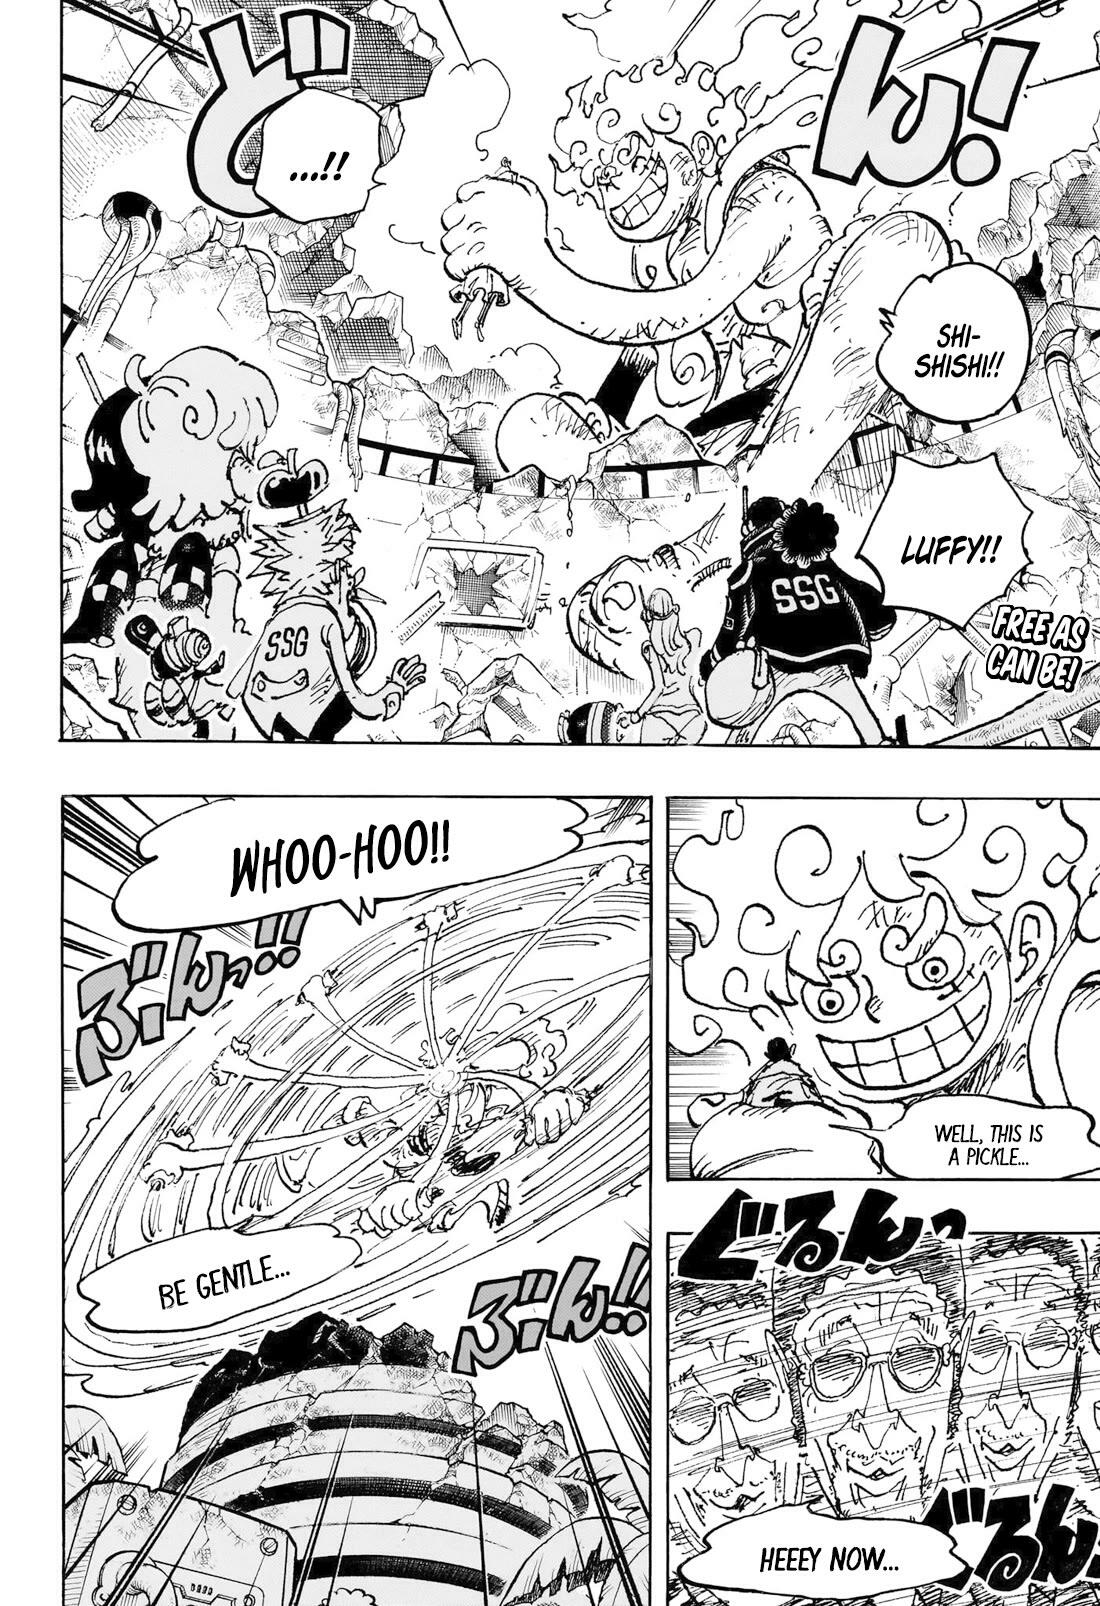 One Piece Chapter 759 – Luffy And Law VS Doflamingo